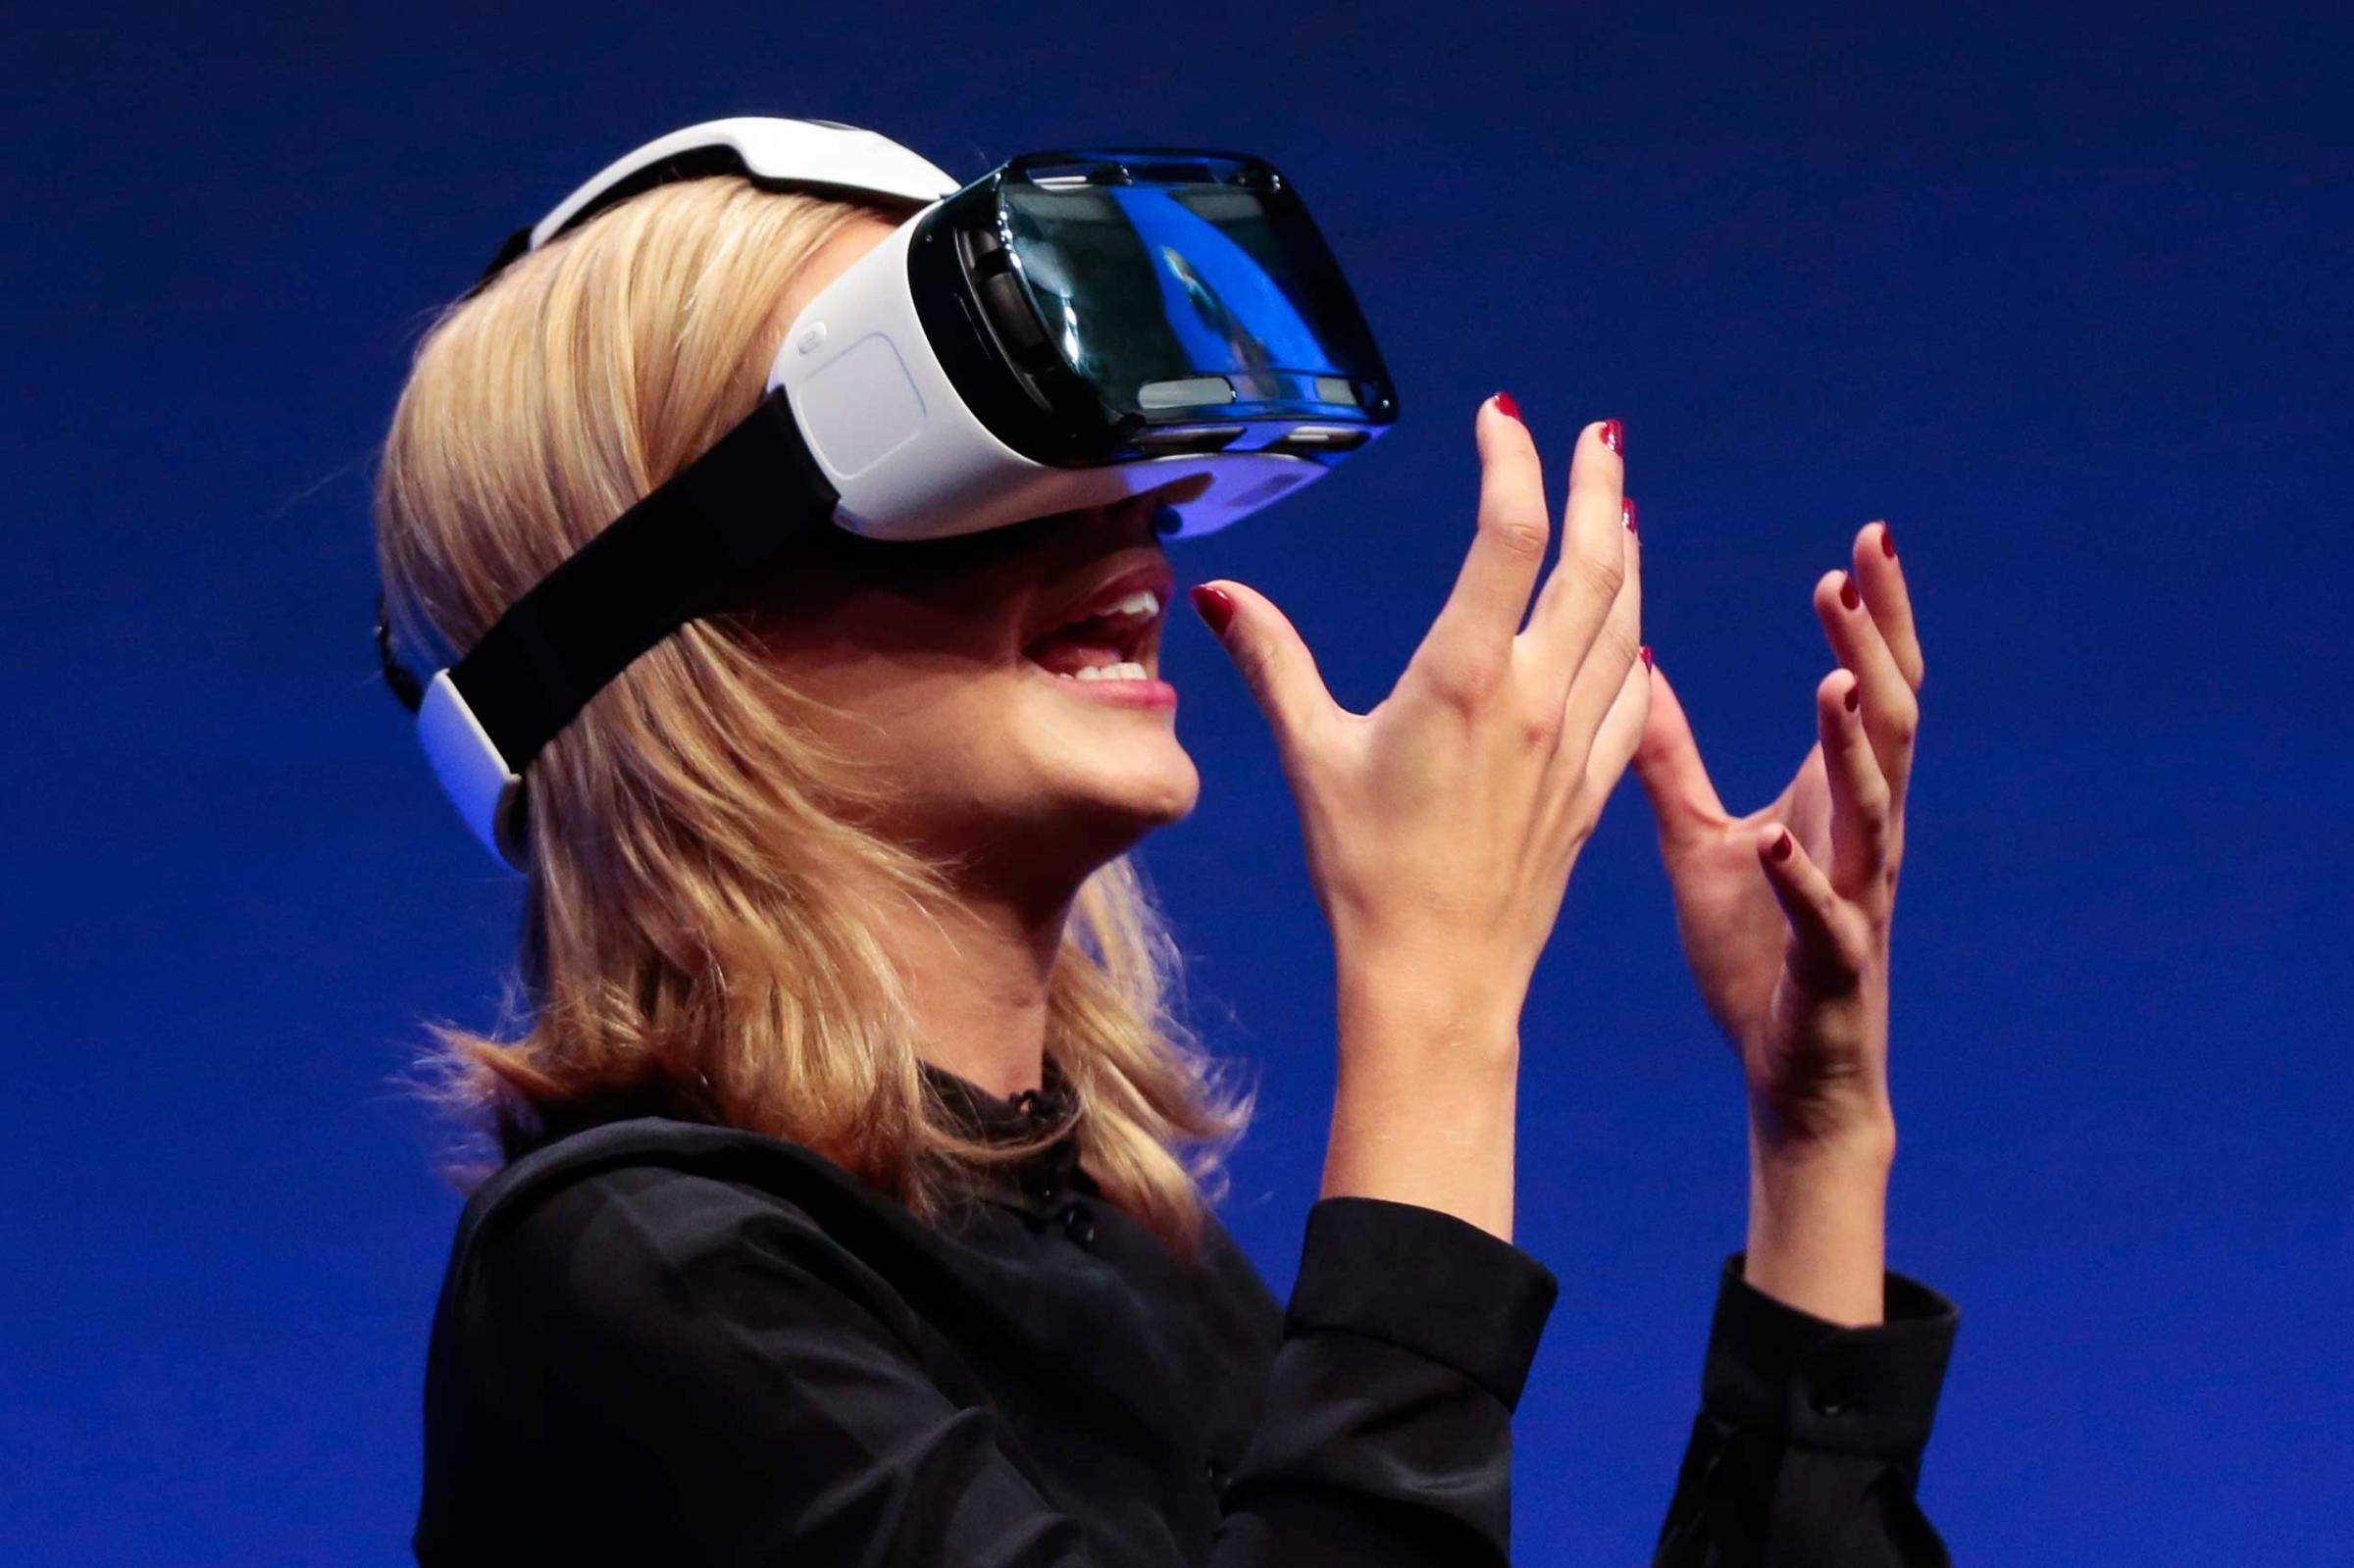 British television presenter Rachel Riley showed a virtual-reality headset called Gear VR during a Samsung event ahead of the consumer electronic fair IFA in Berlin.